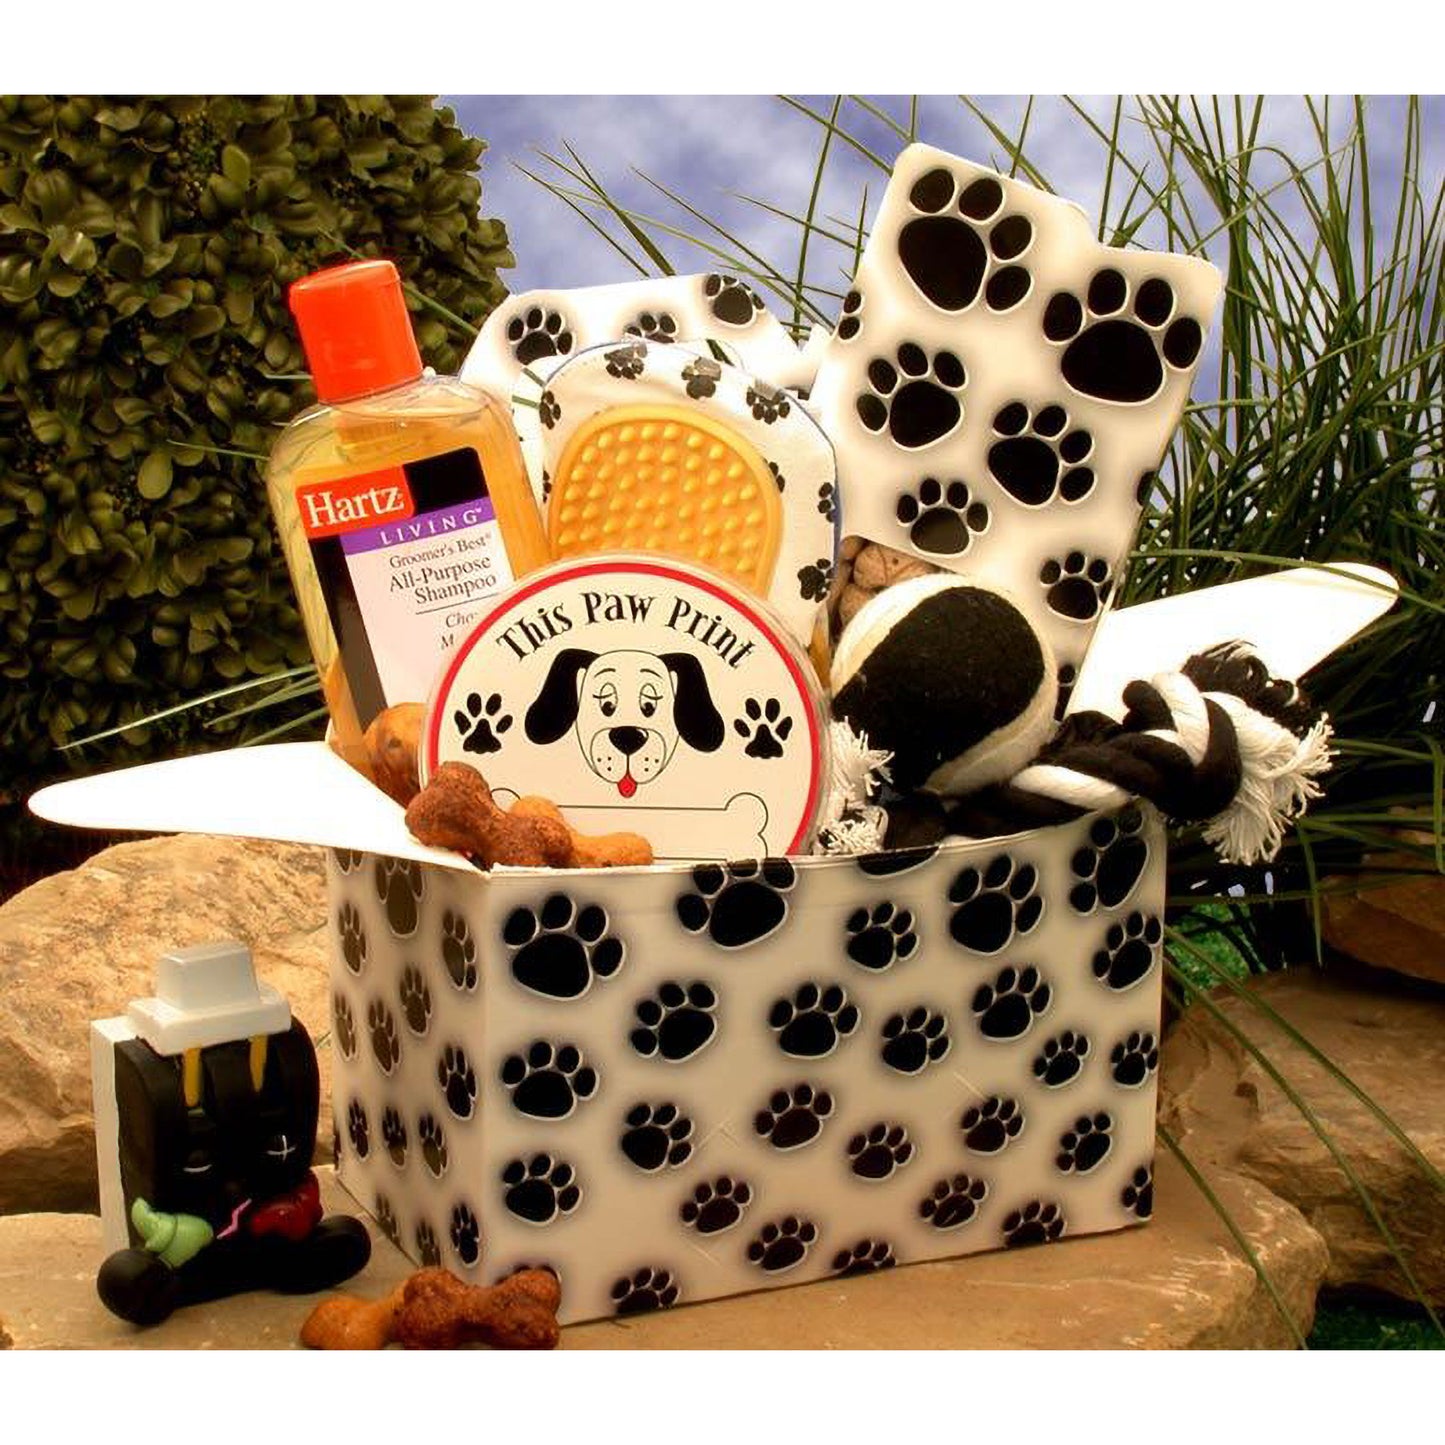 Paw Prints Doggy Care Package